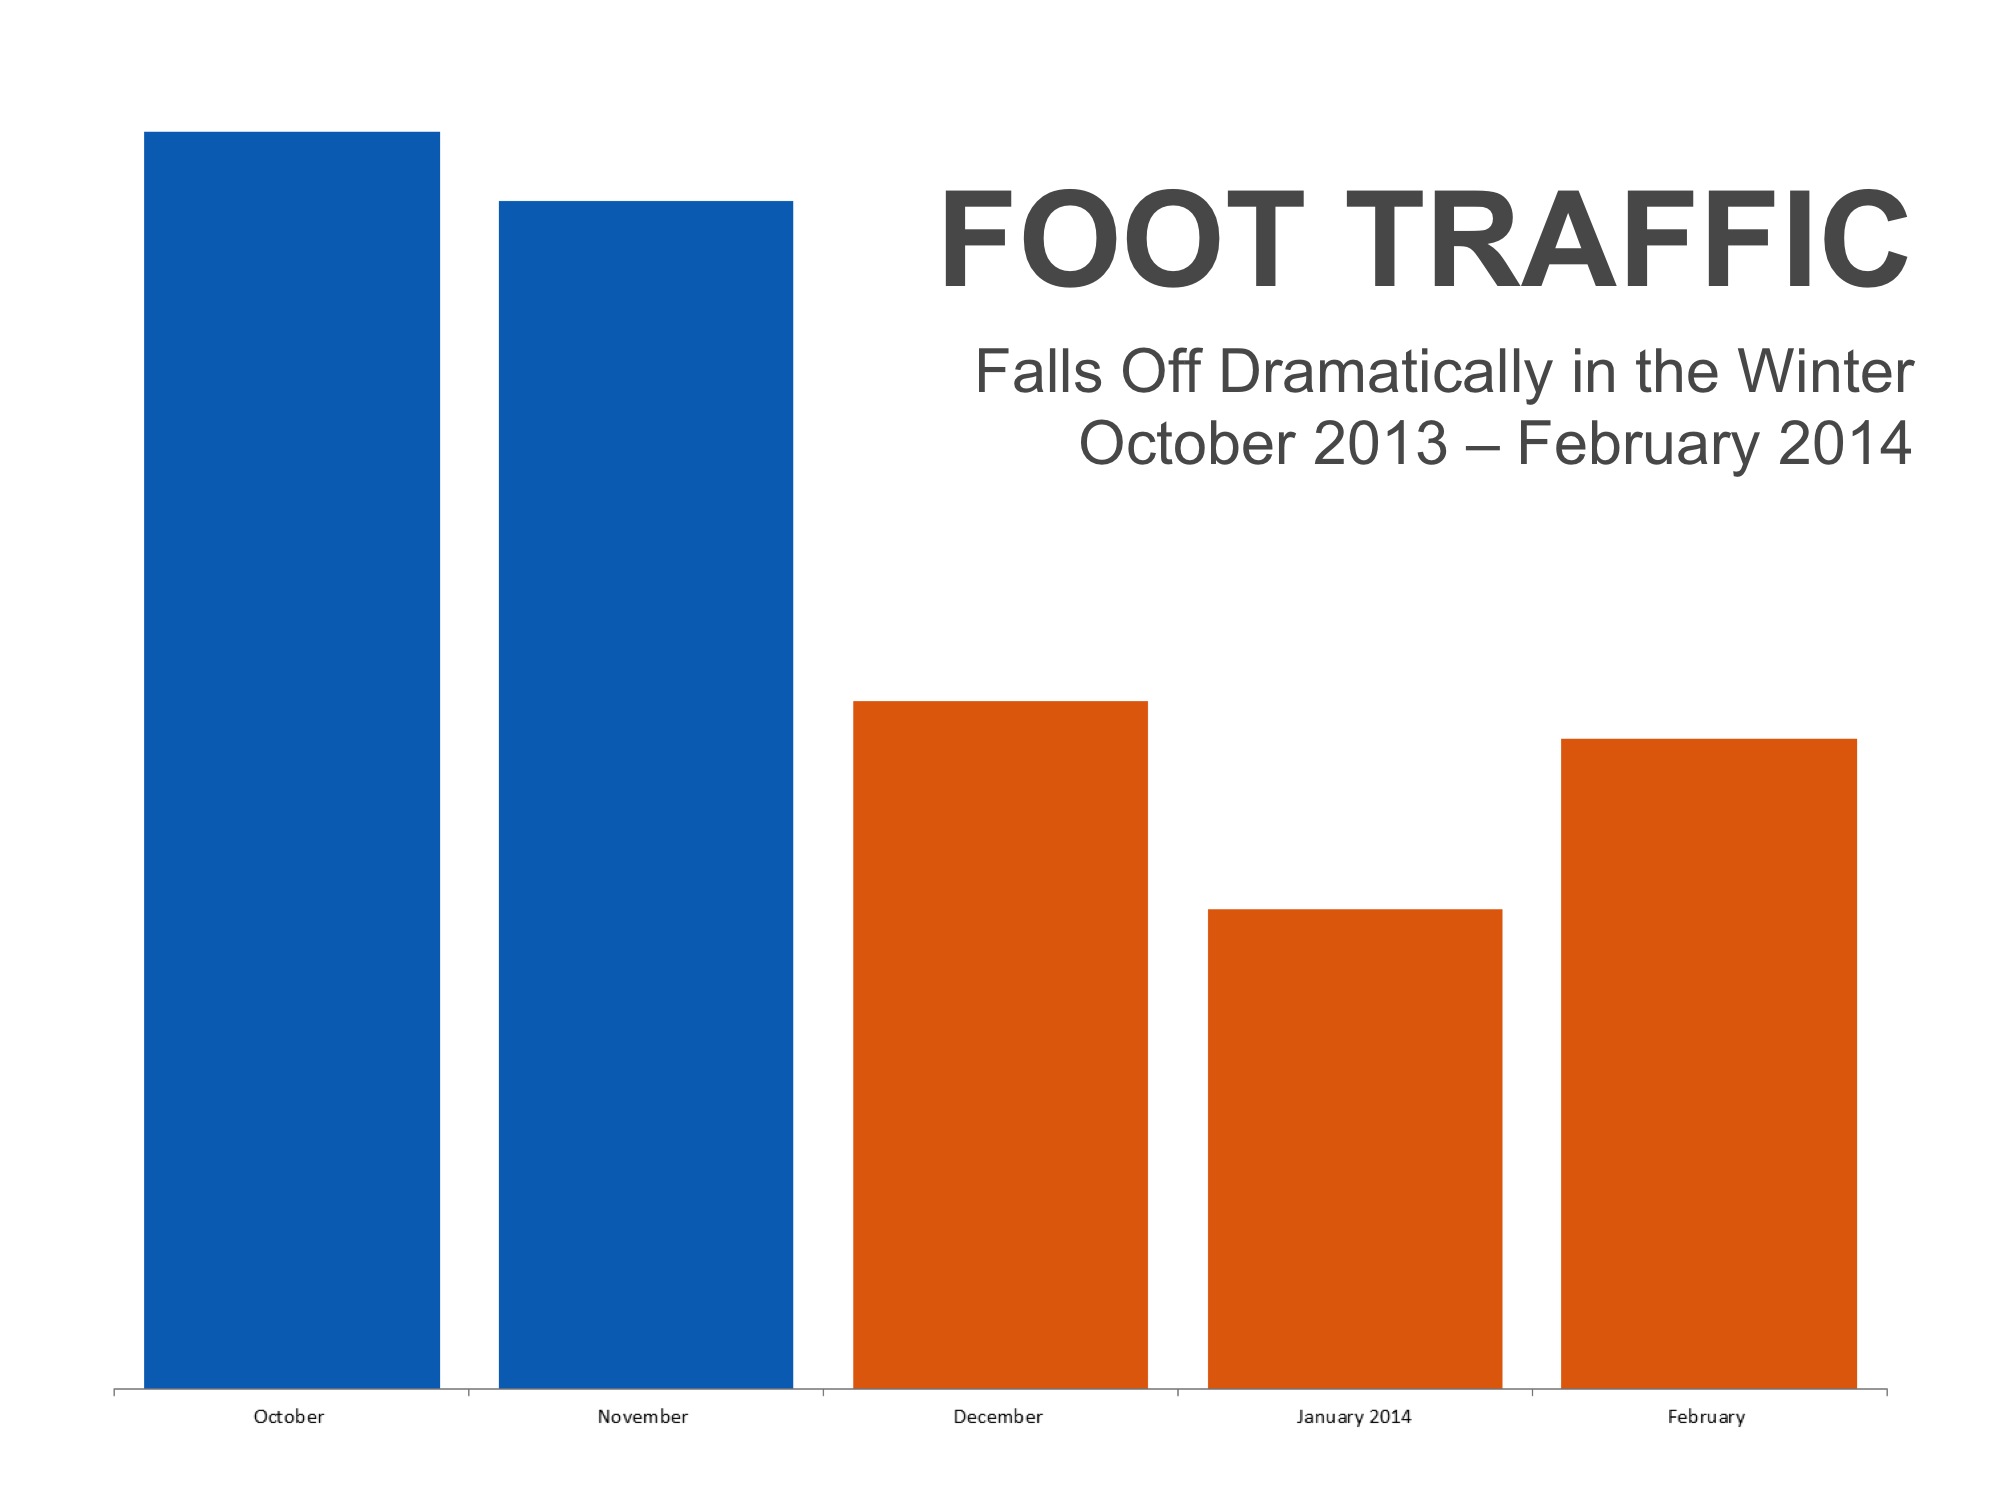 Foot Traffic to Decline in Winter Months | Keeping Current Matters